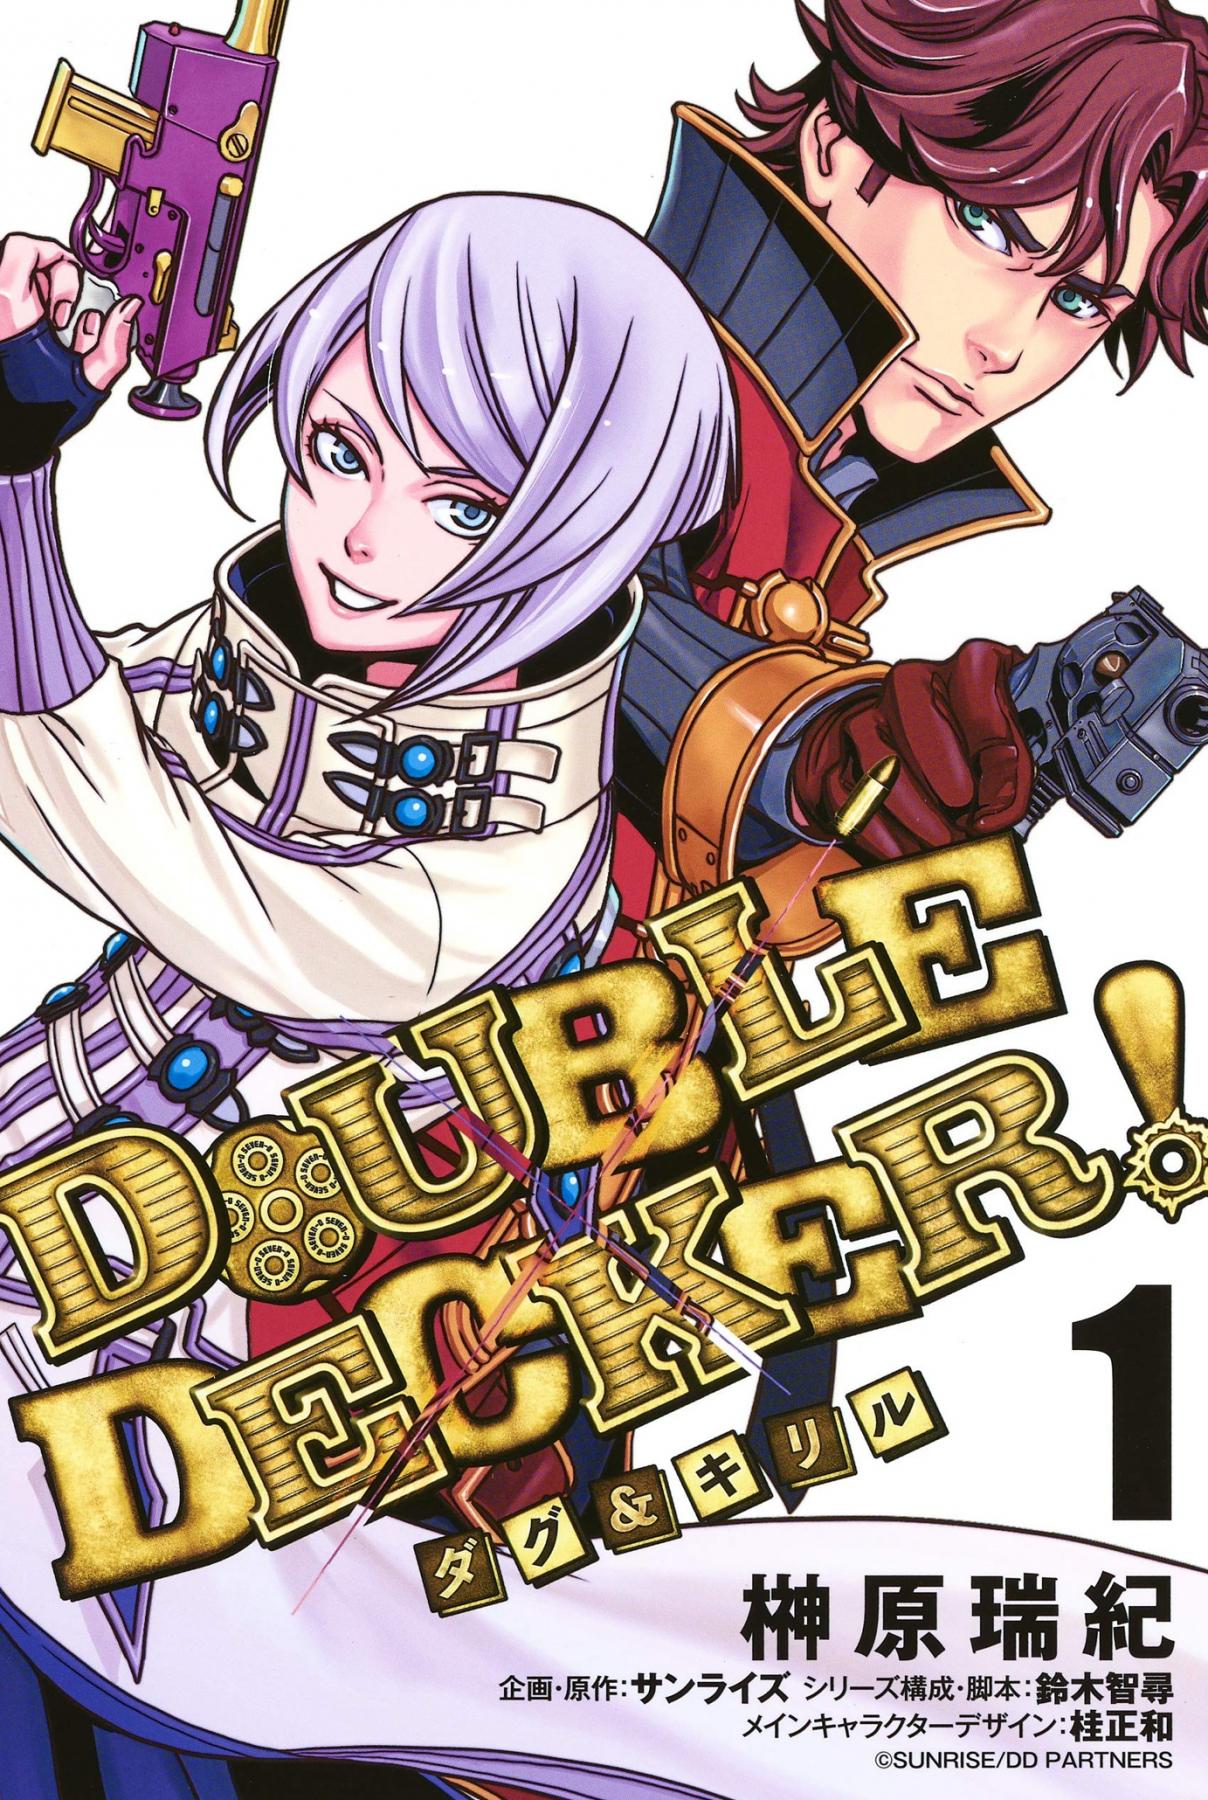 DOUBLE DECKER! Doug and Kirill Vol. 1 Ch. 1.1 Howl at the Two Suns!